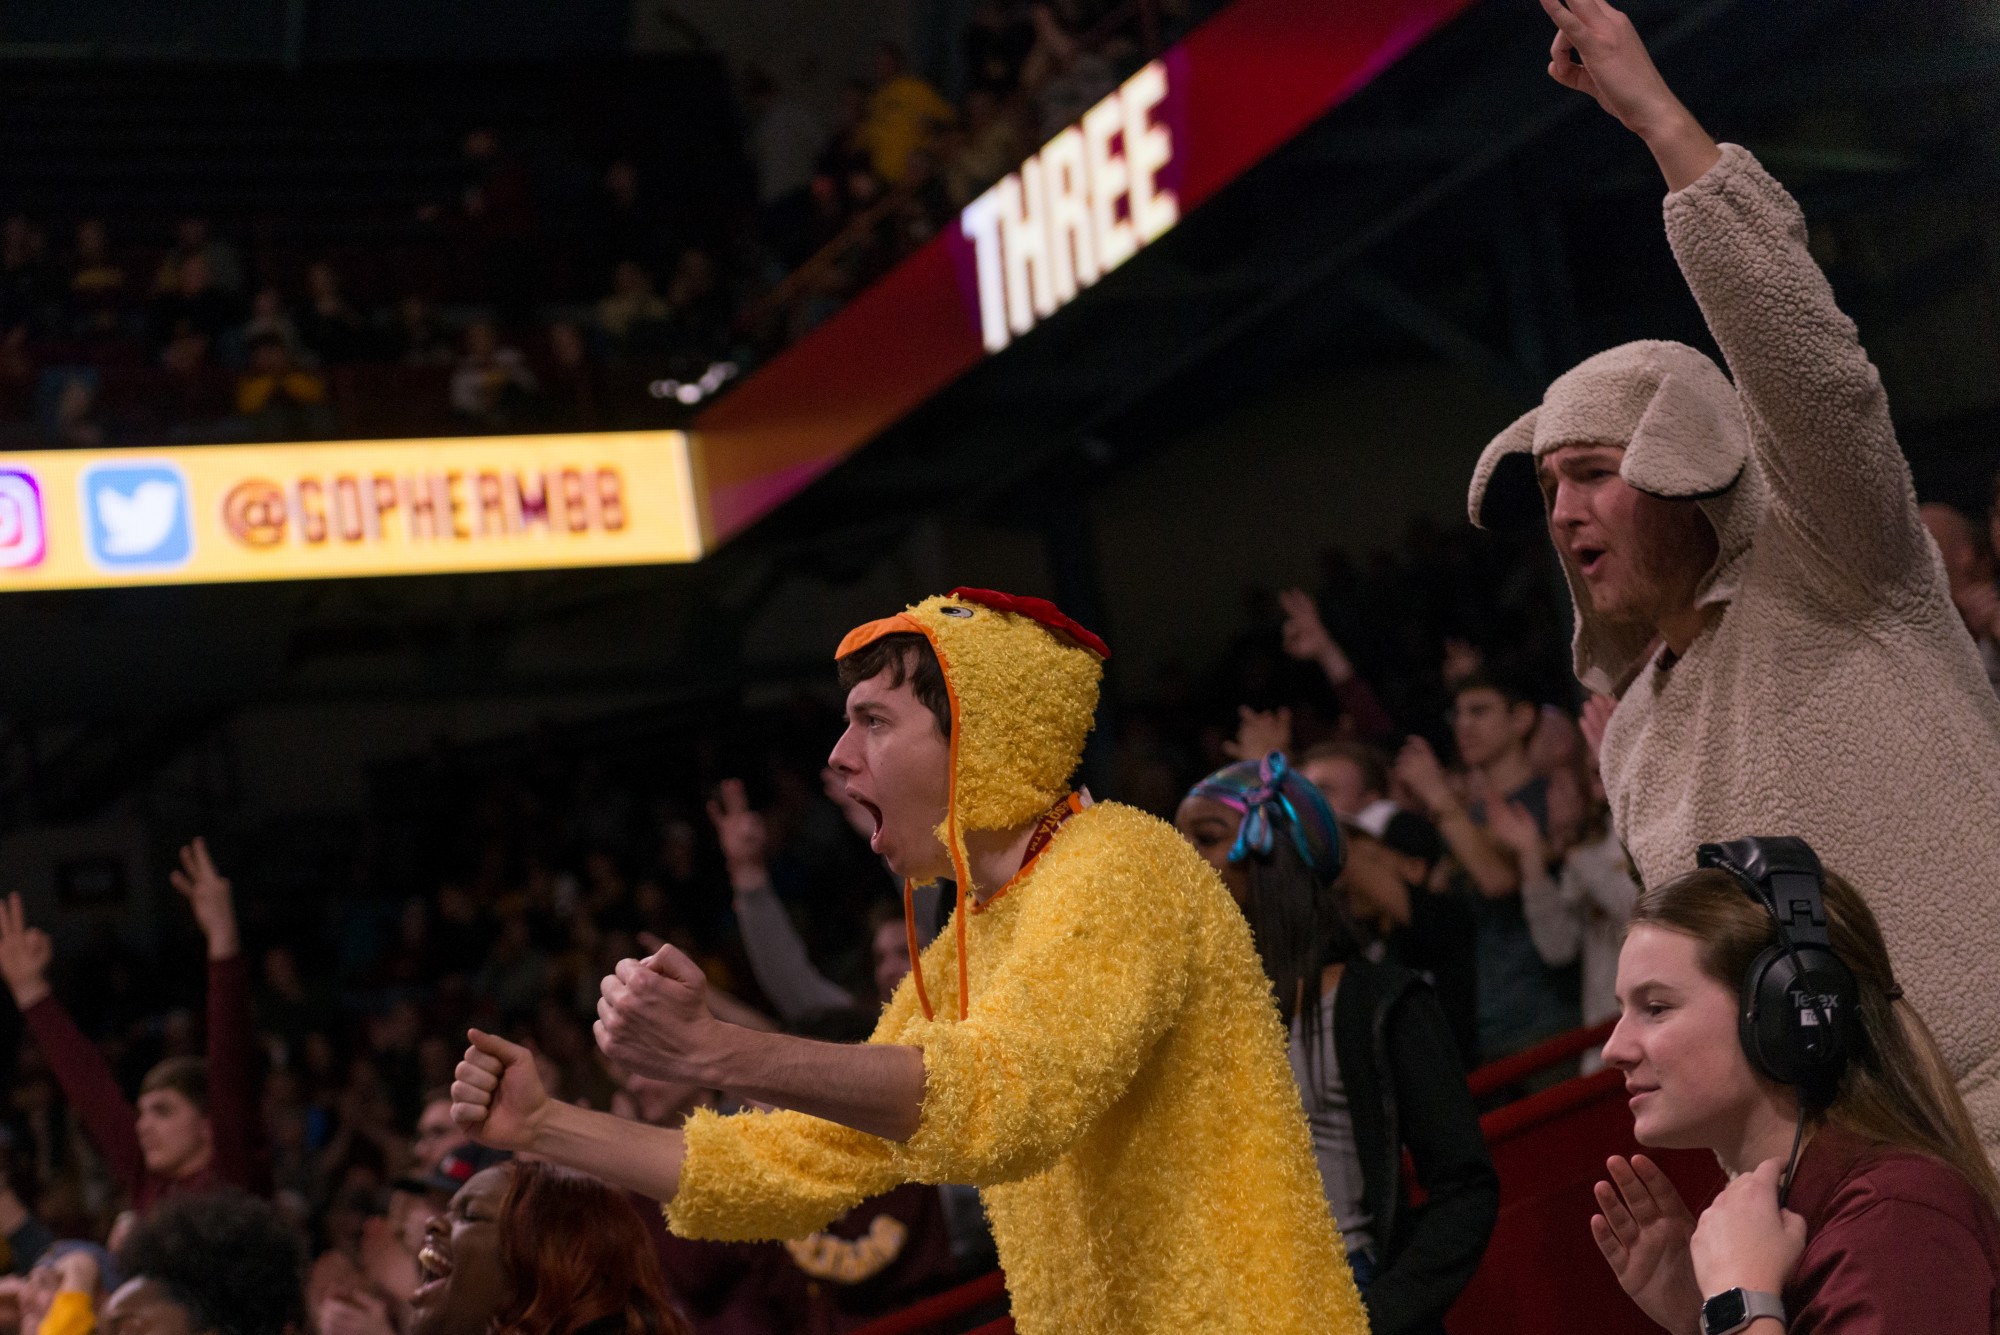 A Gophers fan wearing a chicken costume cheers on the team at Williams Arena on Wednesday, Jan. 15.  Minnesota defeated the Penn State Nittany Lions 75-69. (Kamaan Richards / Minnesota Daily)